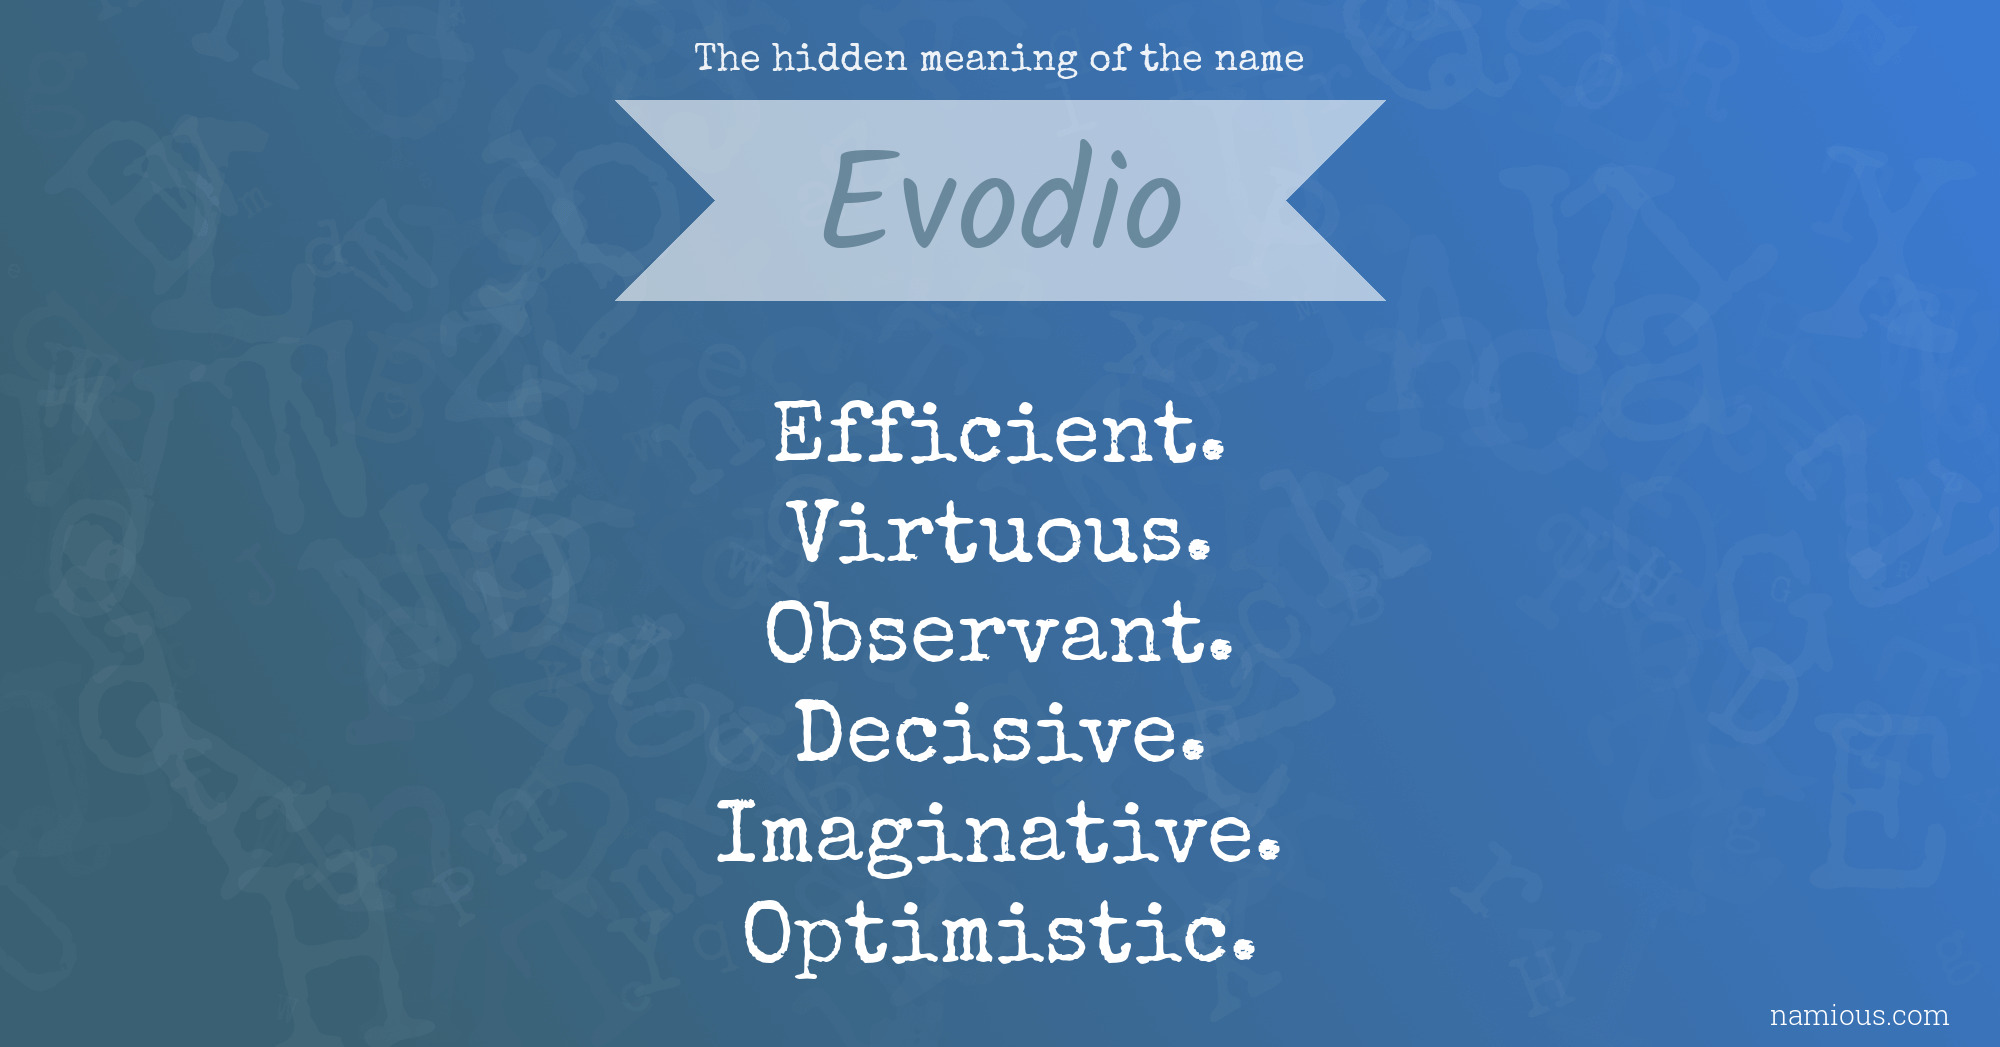 The hidden meaning of the name Evodio